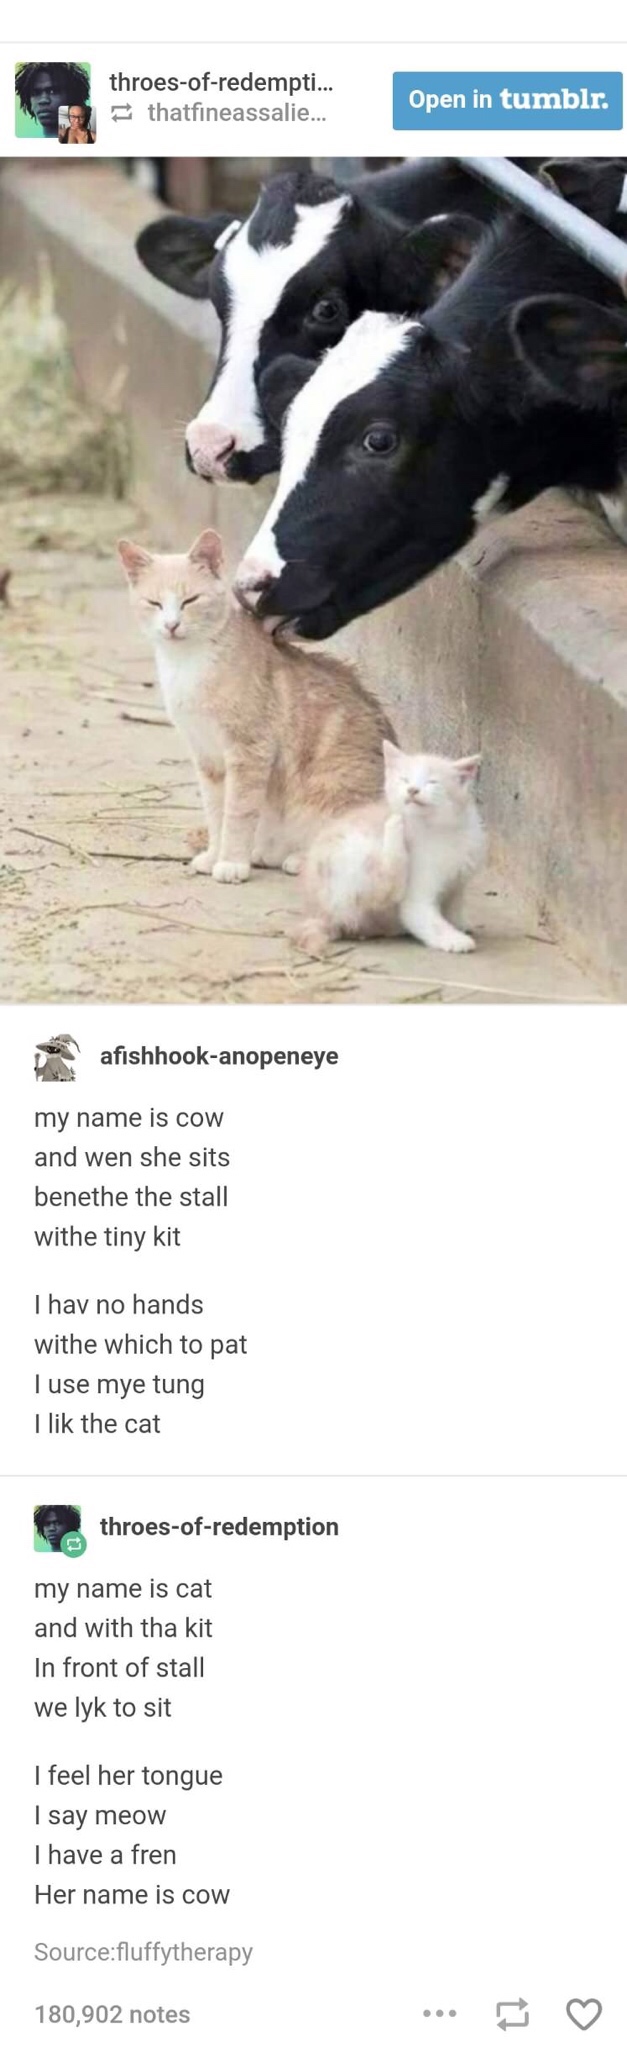 my naym is cow - throesofredempti... thatfineassalie... Open in tumblr. afishhookanopeneye my name is cow and wen she sits benethe the stall withe tiny kit I hav no hands withe which to pat I use mye tung I lik the cat throesofredemption my name is cat an